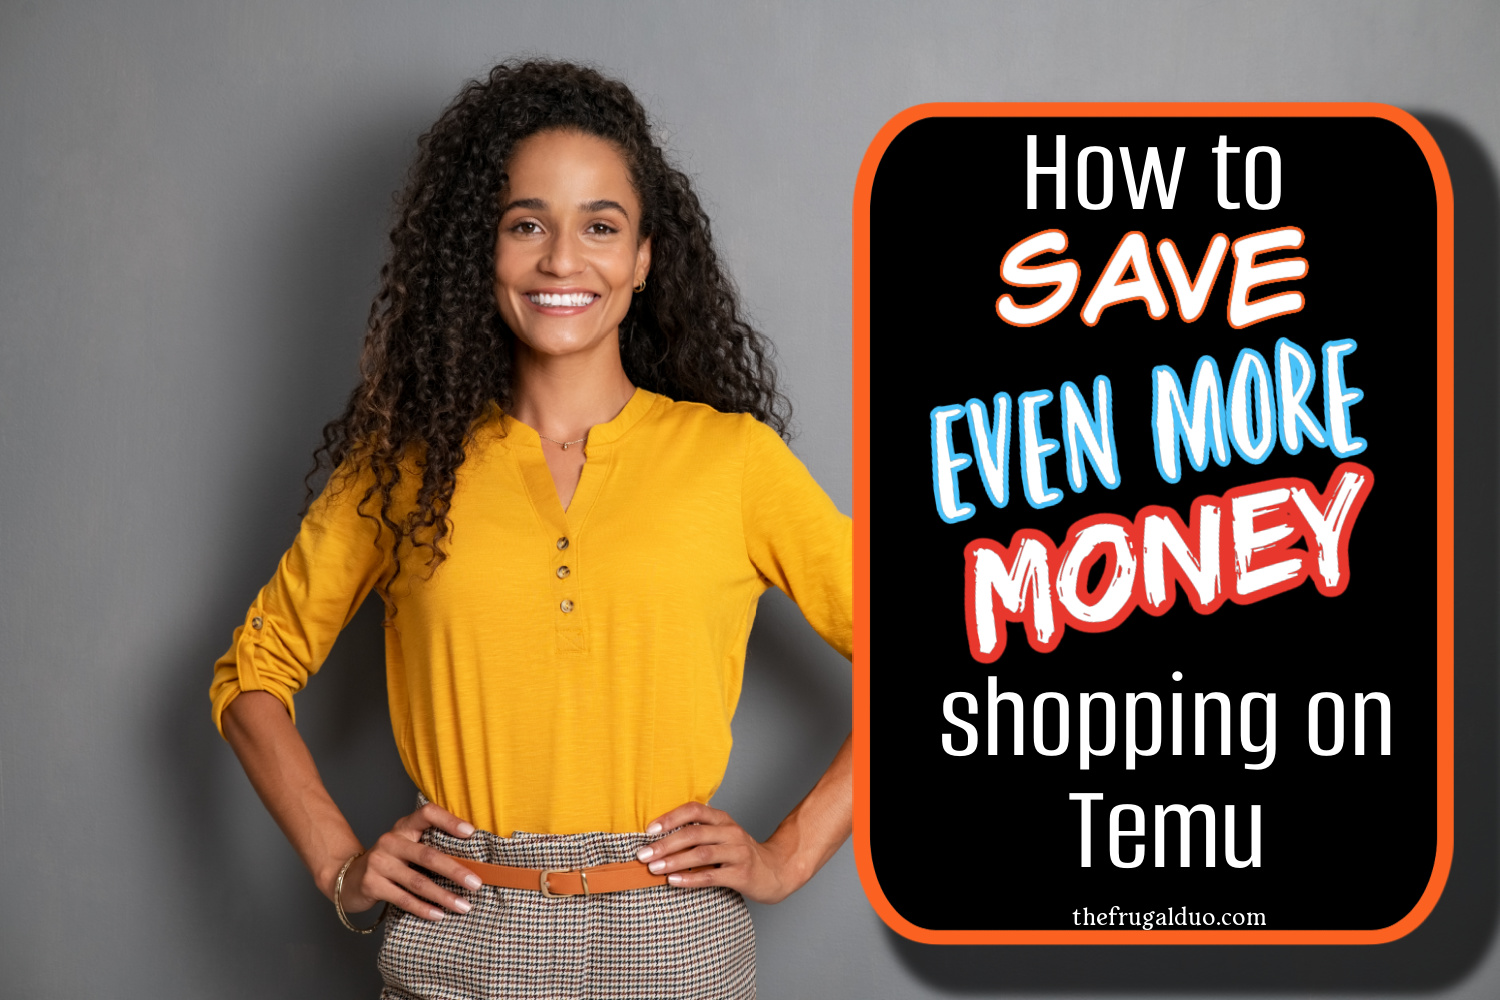 How to Save Even More Money Shopping on Temu